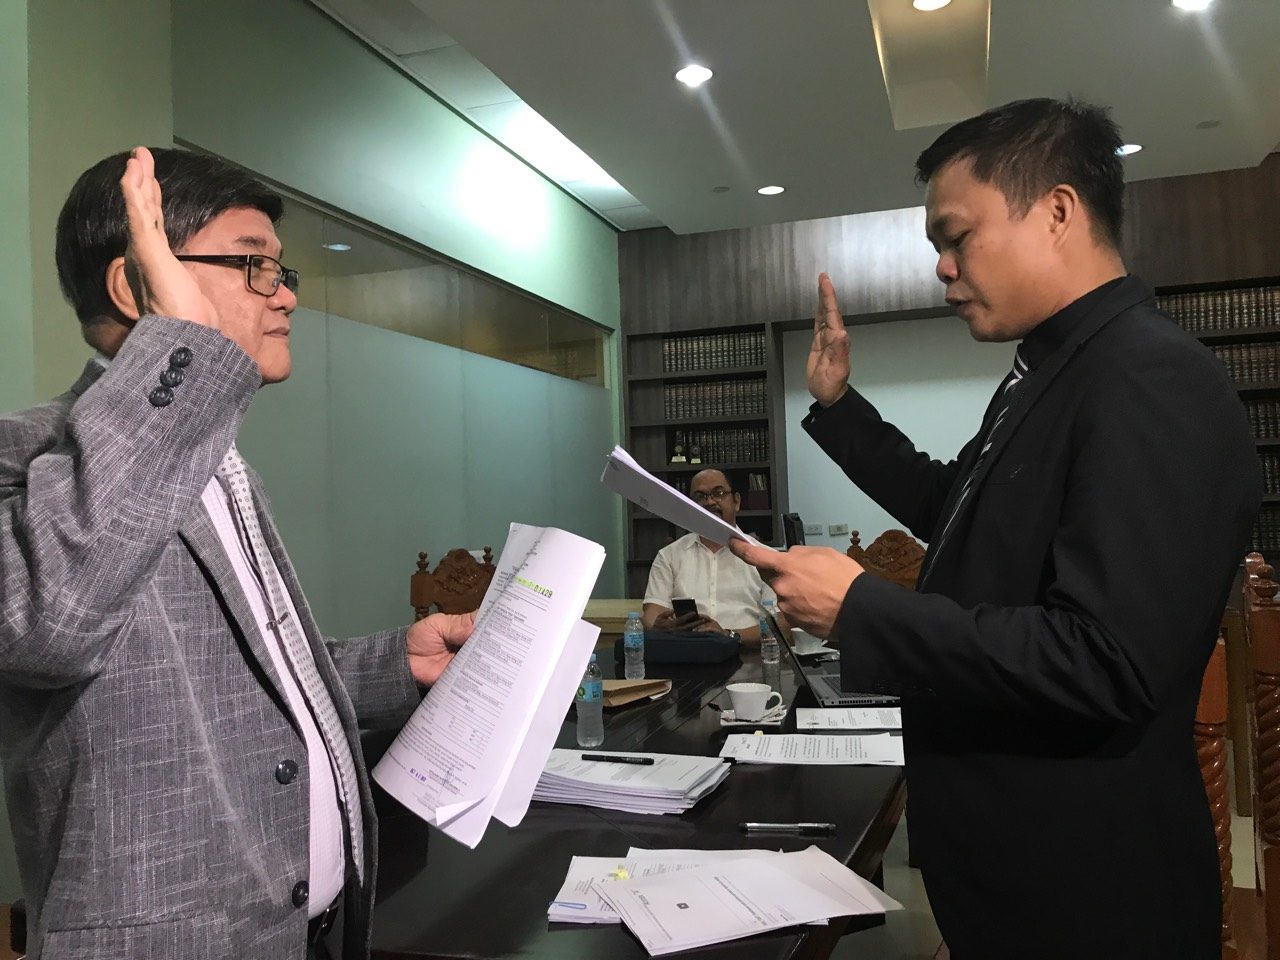 Aguirre files wiretapping complaint vs Hontiveros